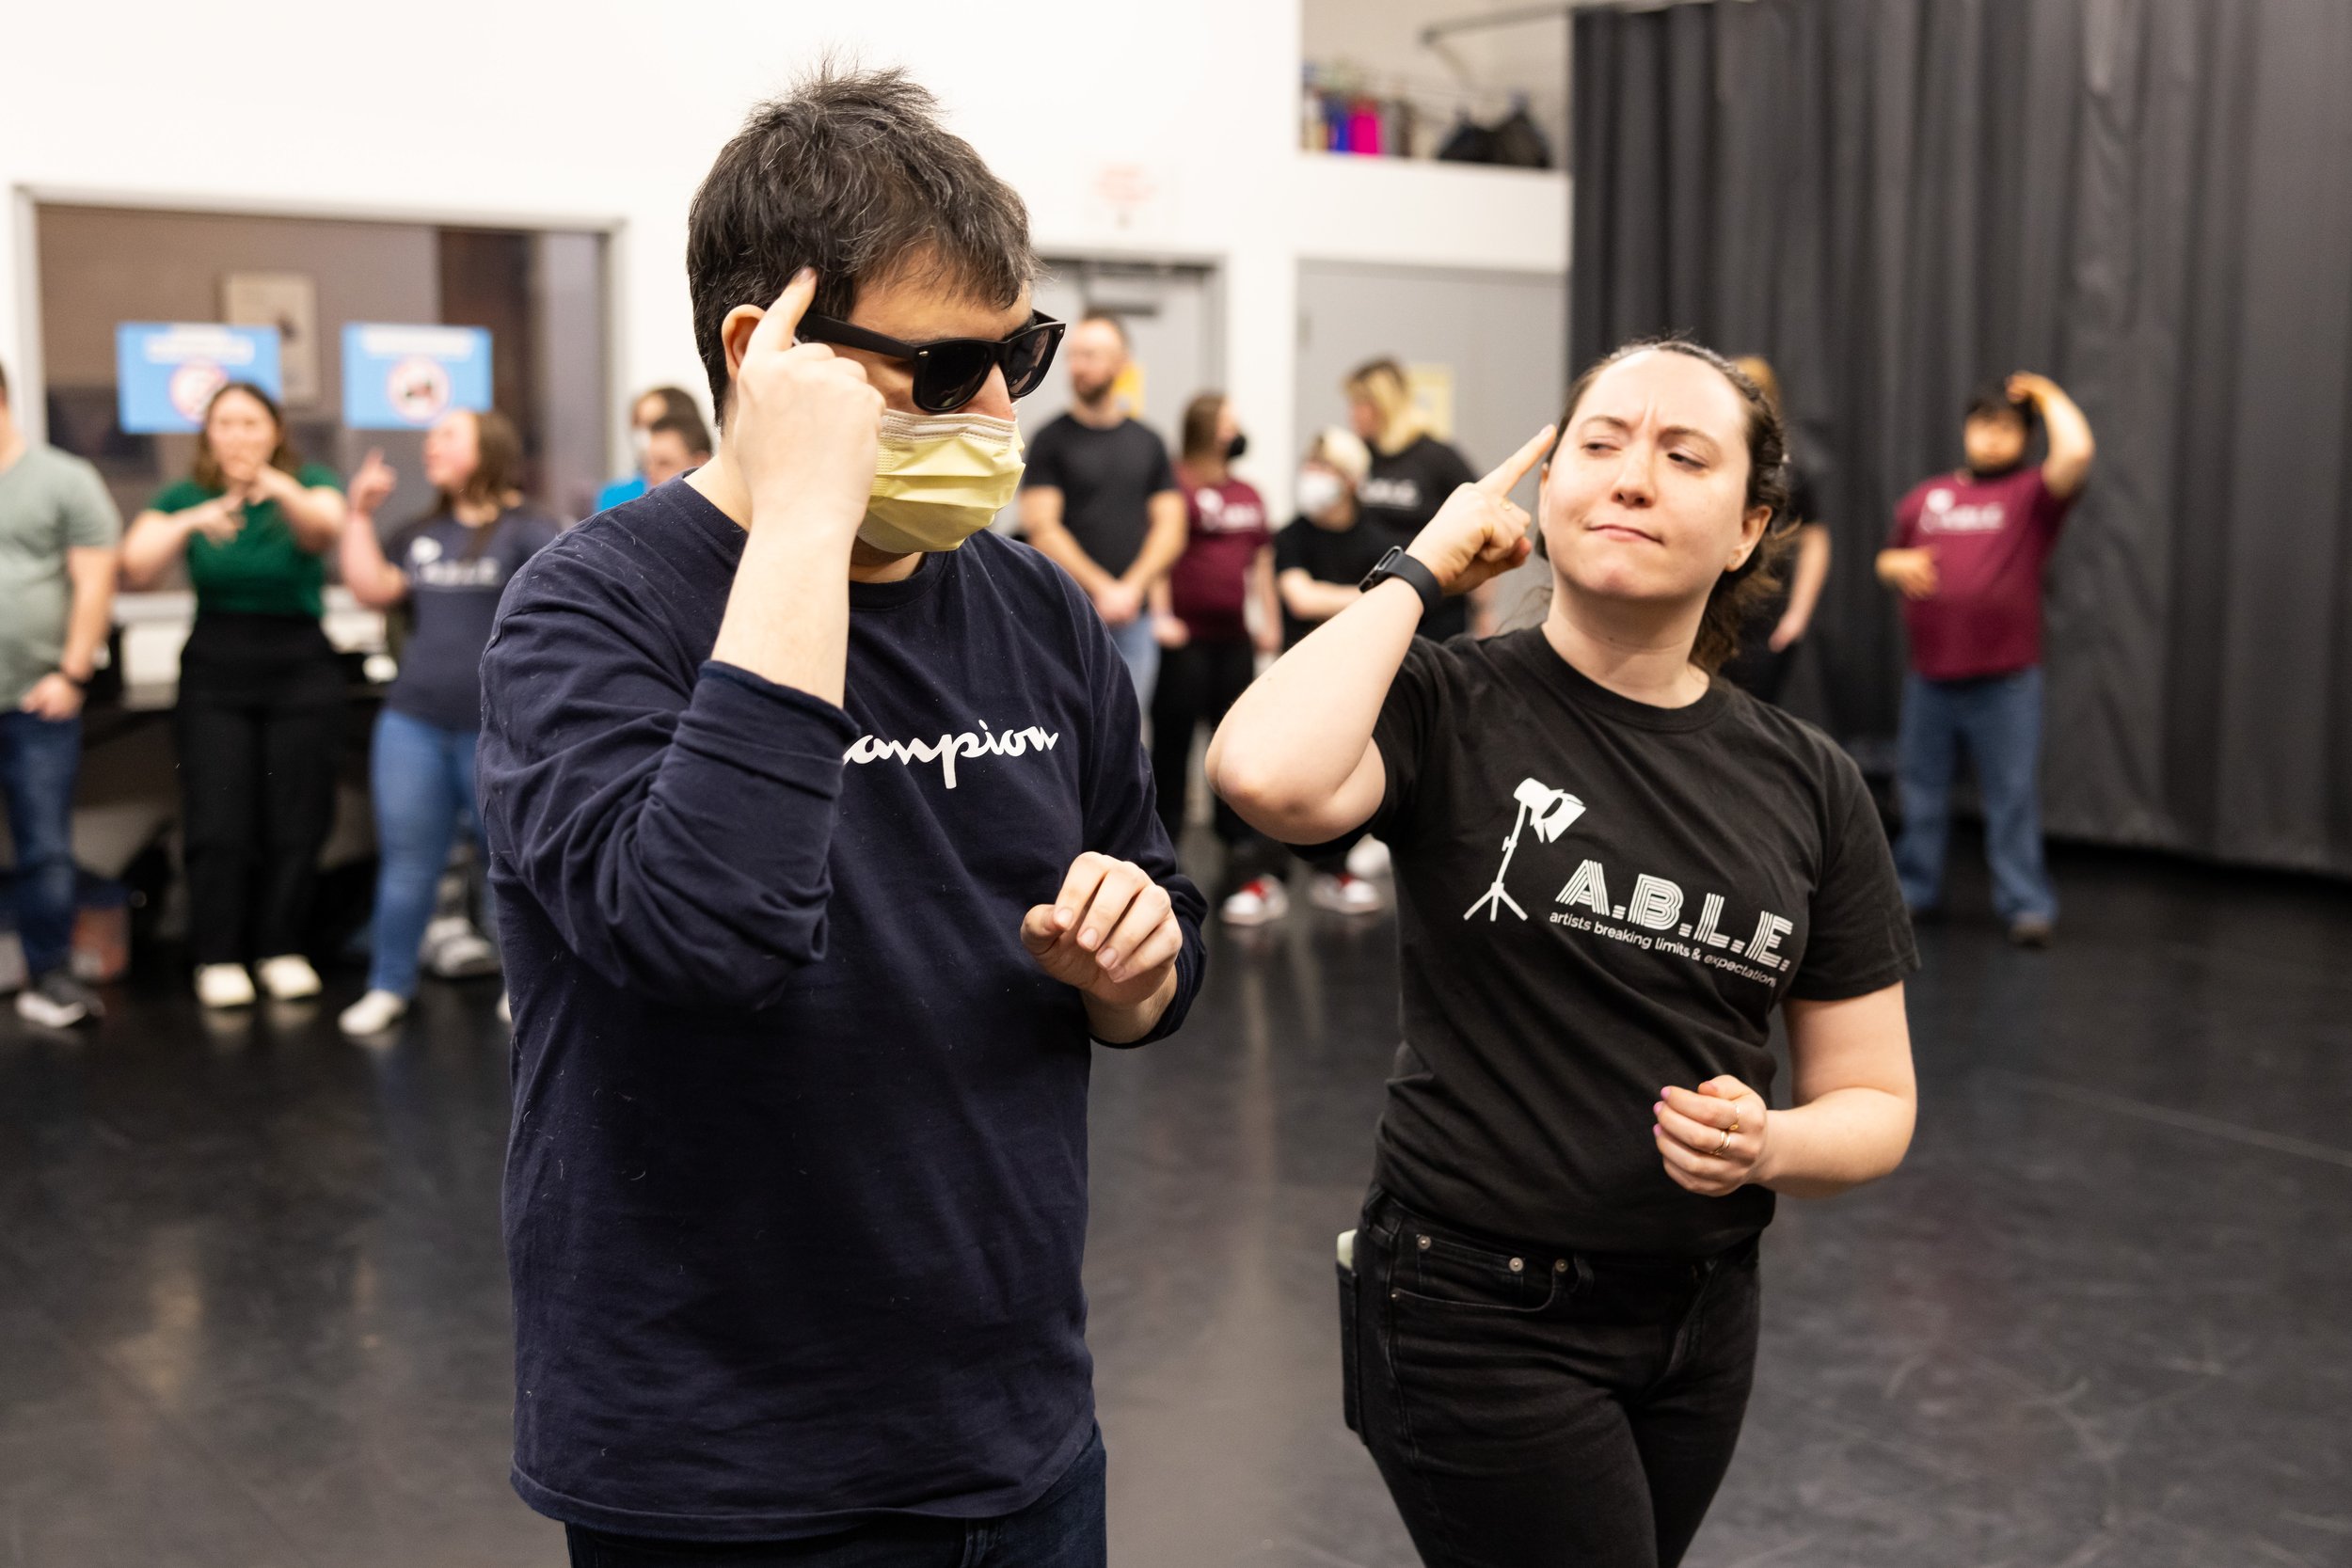  Actors like Jake Solworth pair with volunteer facilitators like Amy Bahr to receive individual attention in every A.B.L.E. rehearsal -  photo by Justin Barbin  